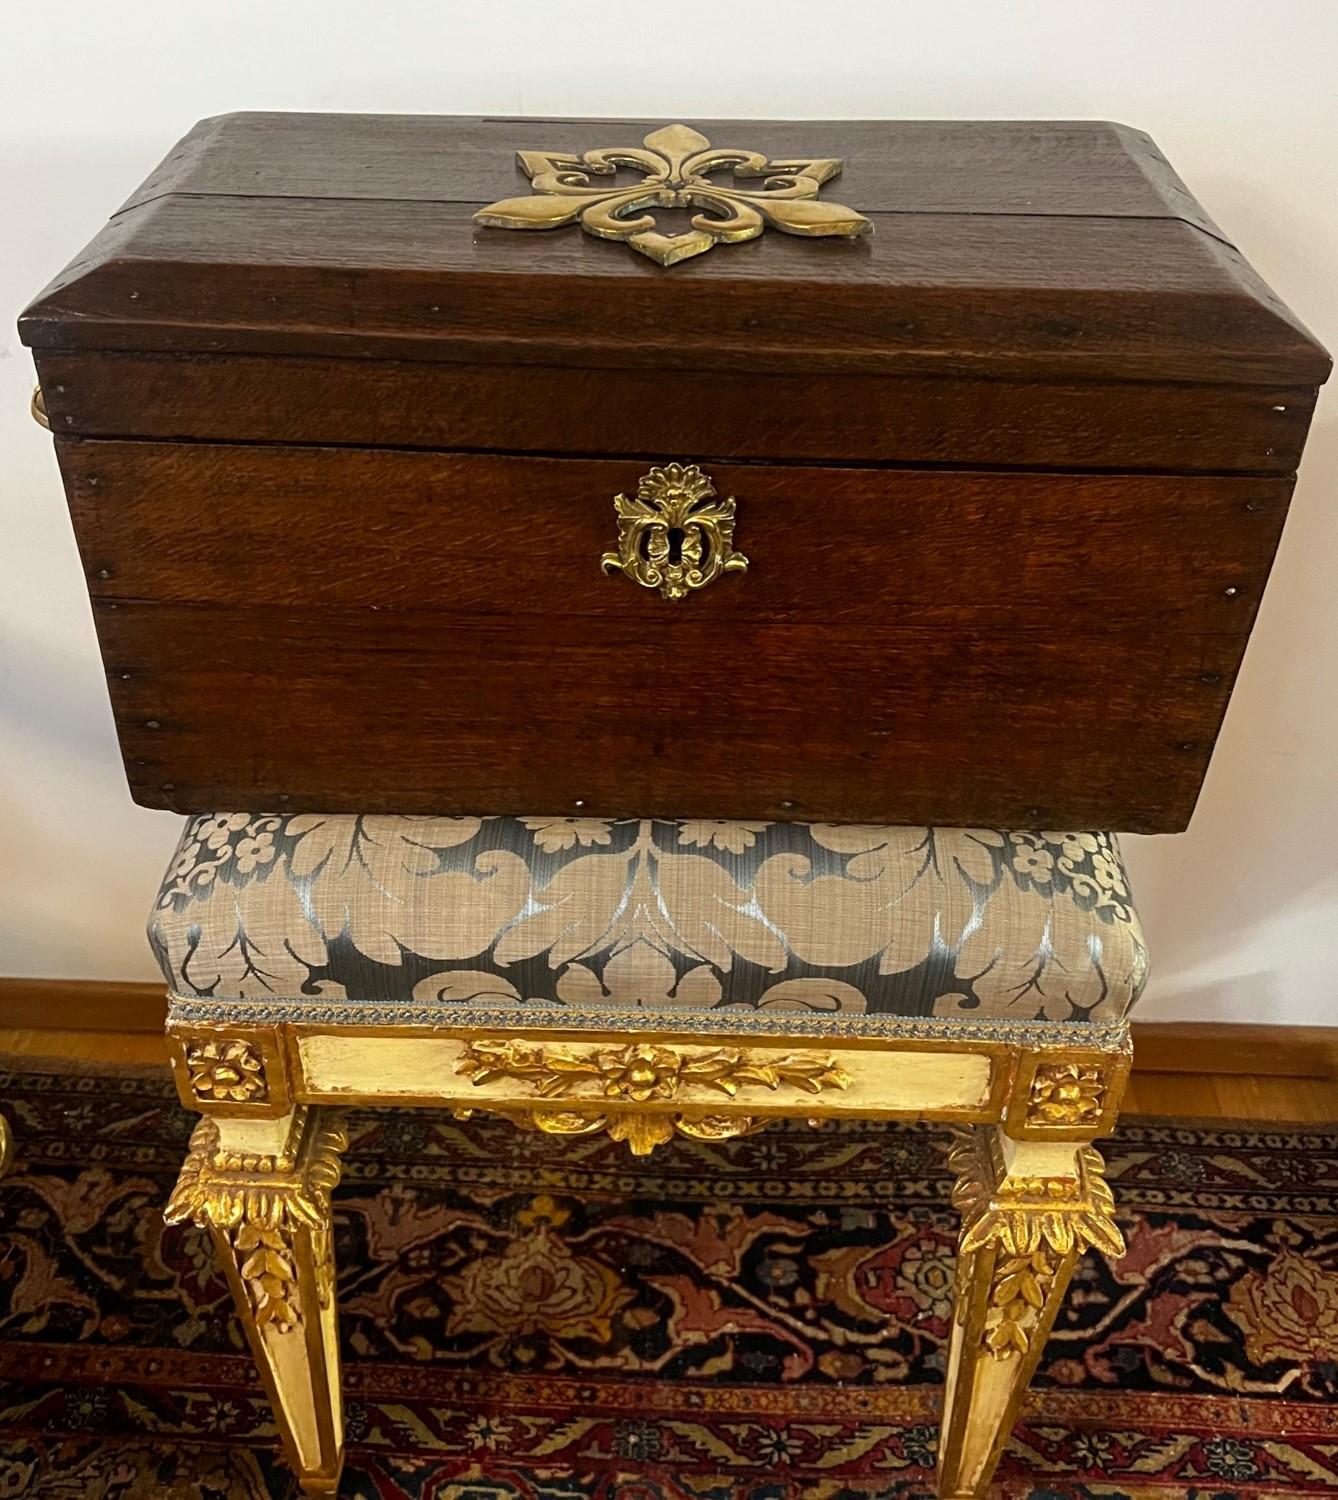 Stunning solid french/ 1 inch thick wooden planks oak wine box decorated with gold gilded bronze handles on both sides and on the lid with a Royal Fleur-de-lis symbol, - an emblem resembling an iris flower and historically associated with France.